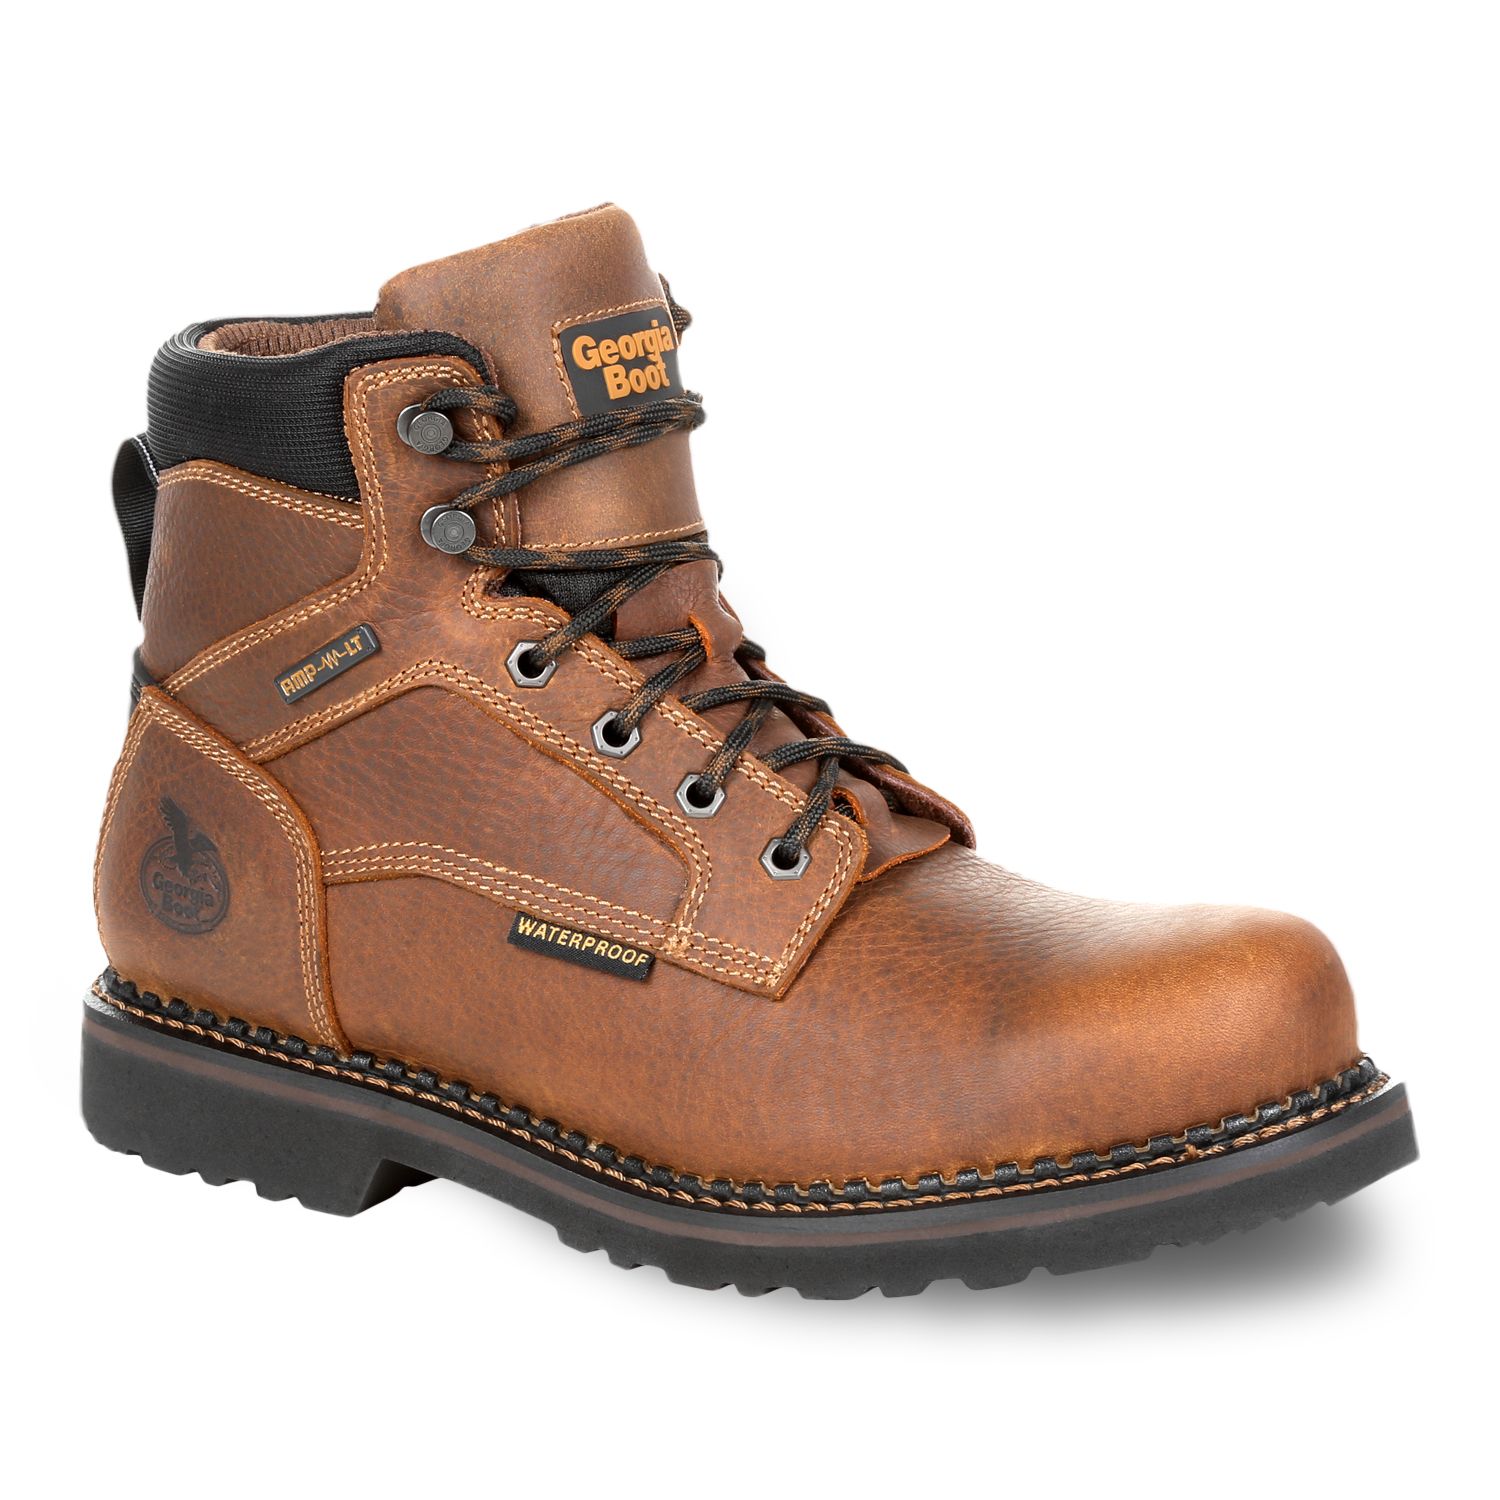 men's work boots at kohl's